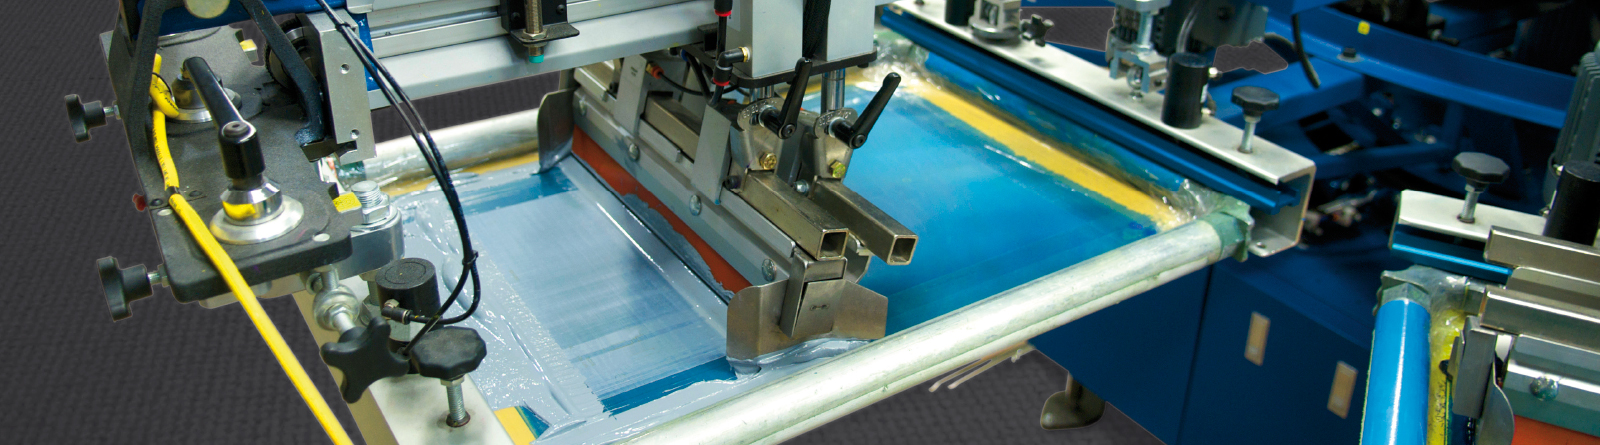 Printing-and-Printing-Equipment-banner